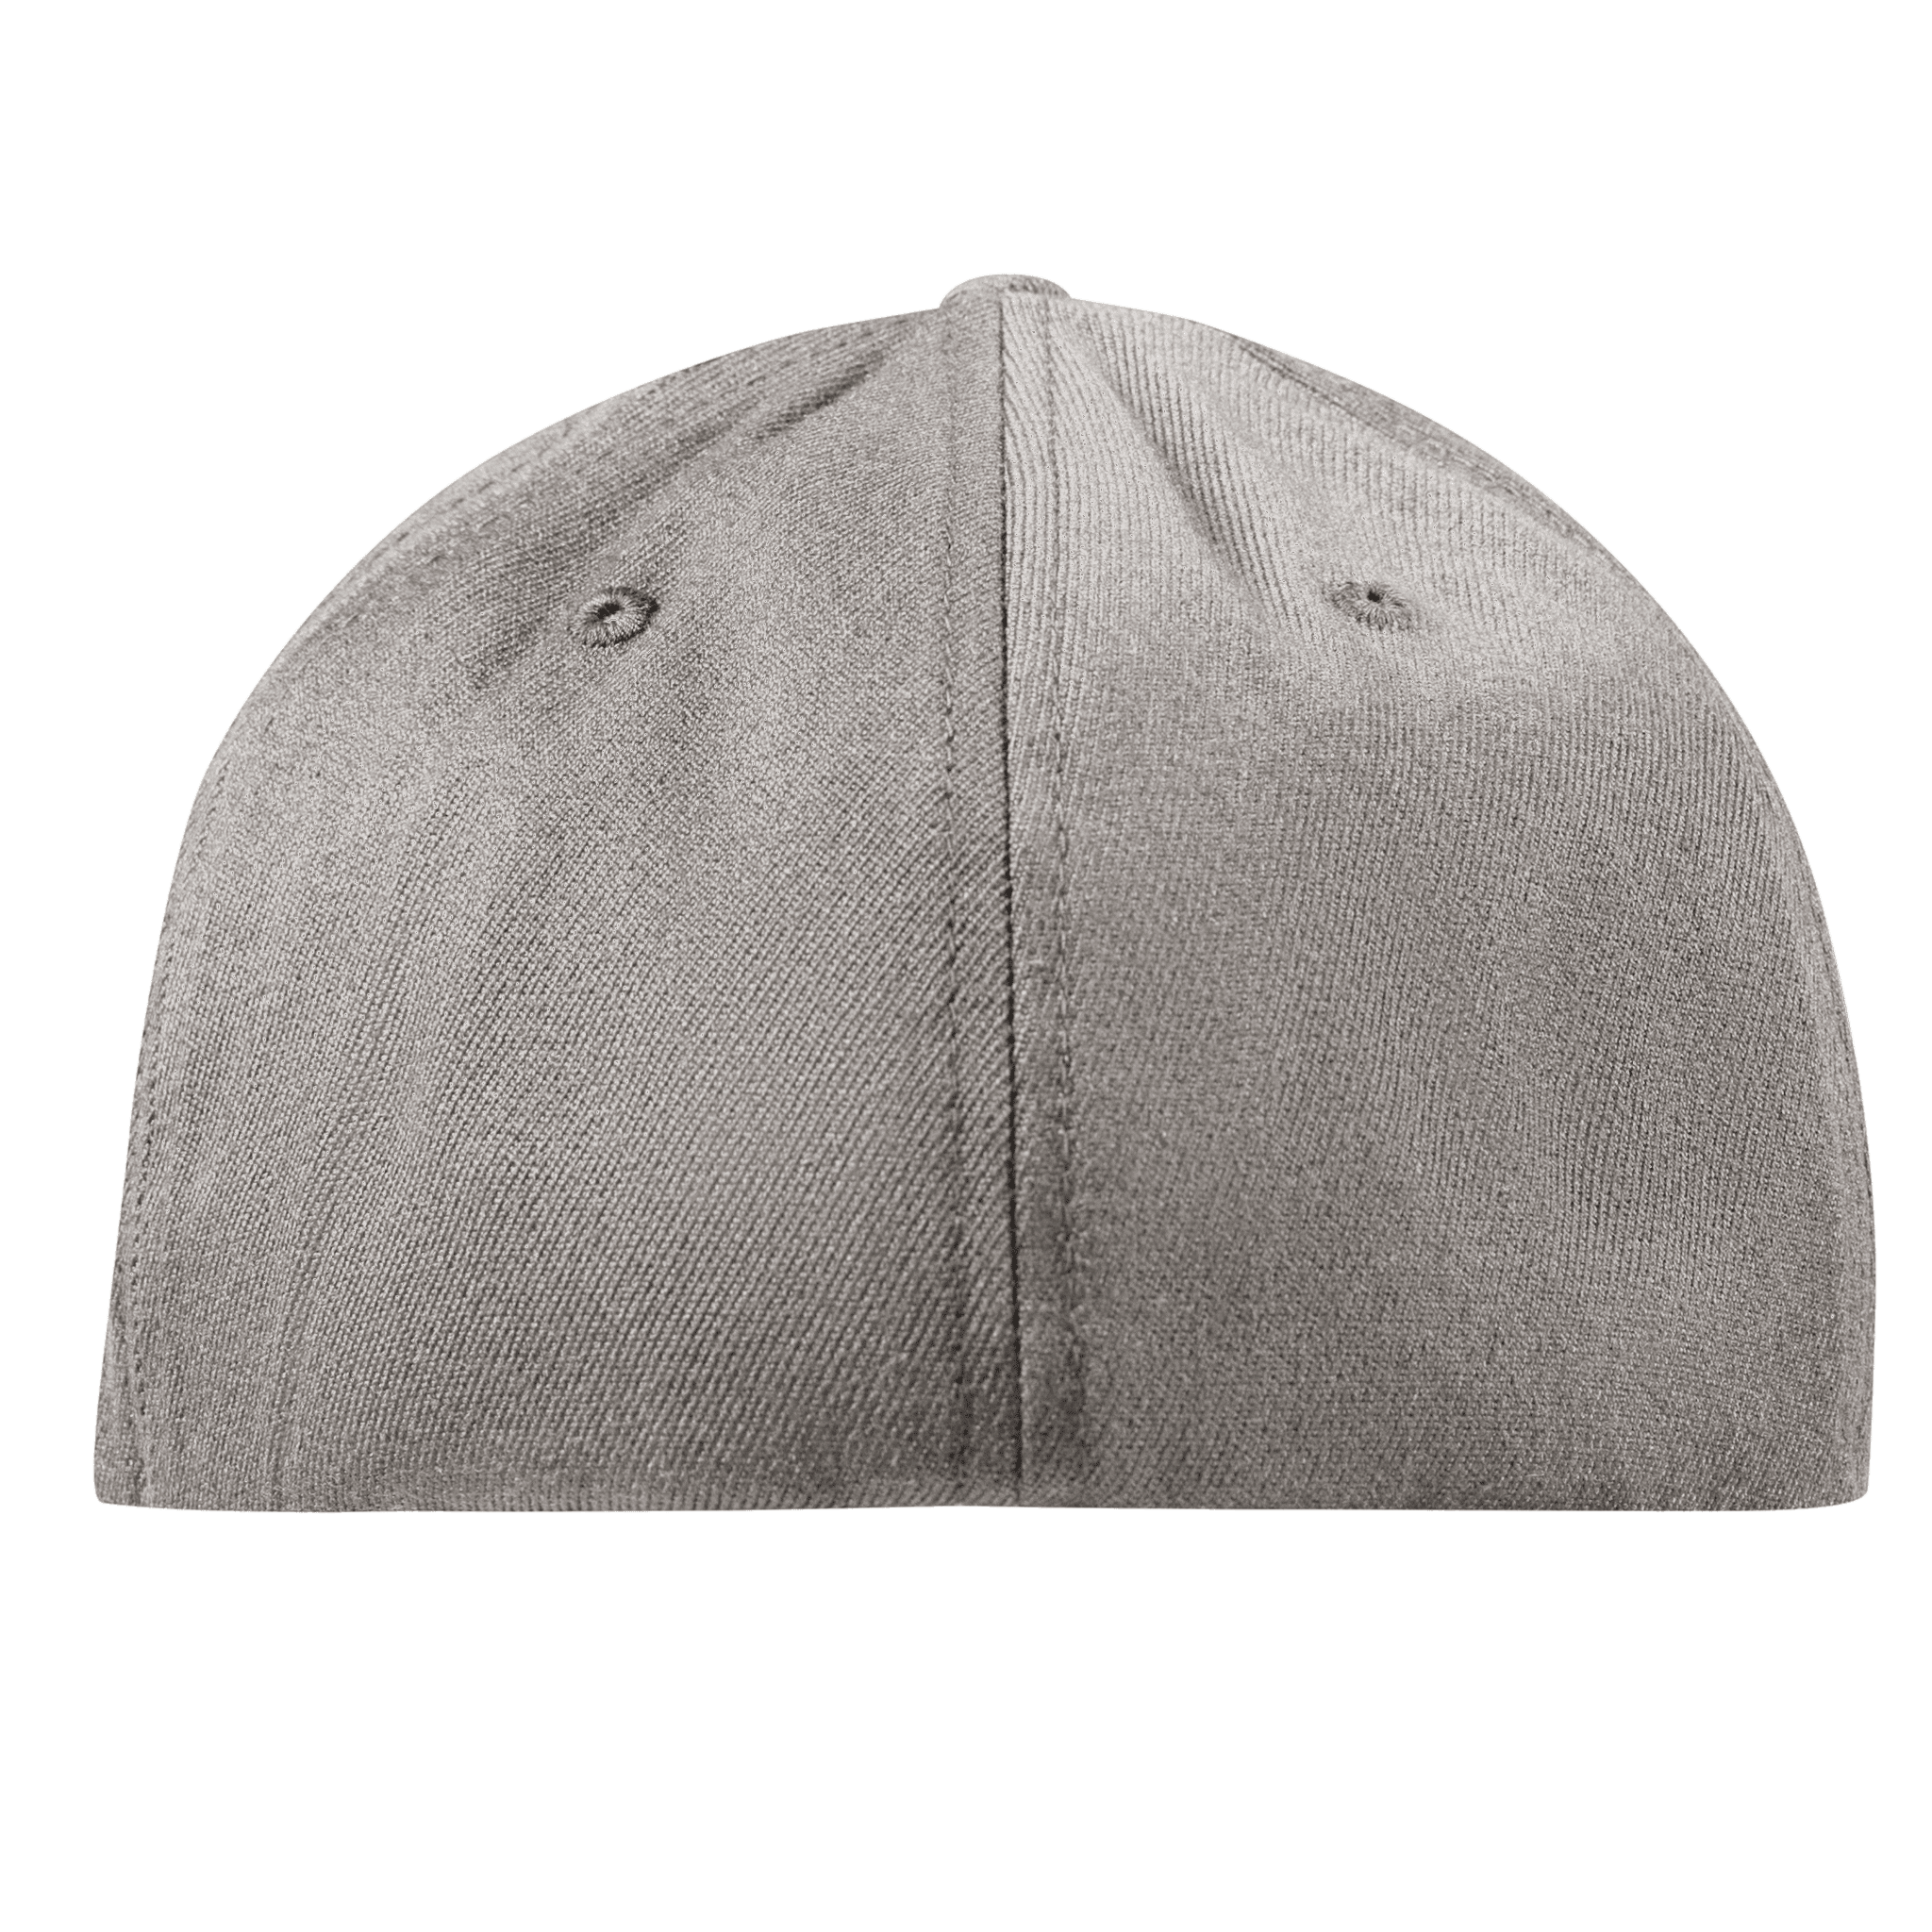 Wyoming 44 Midnight Flexfit Fitted Back Heather Grey